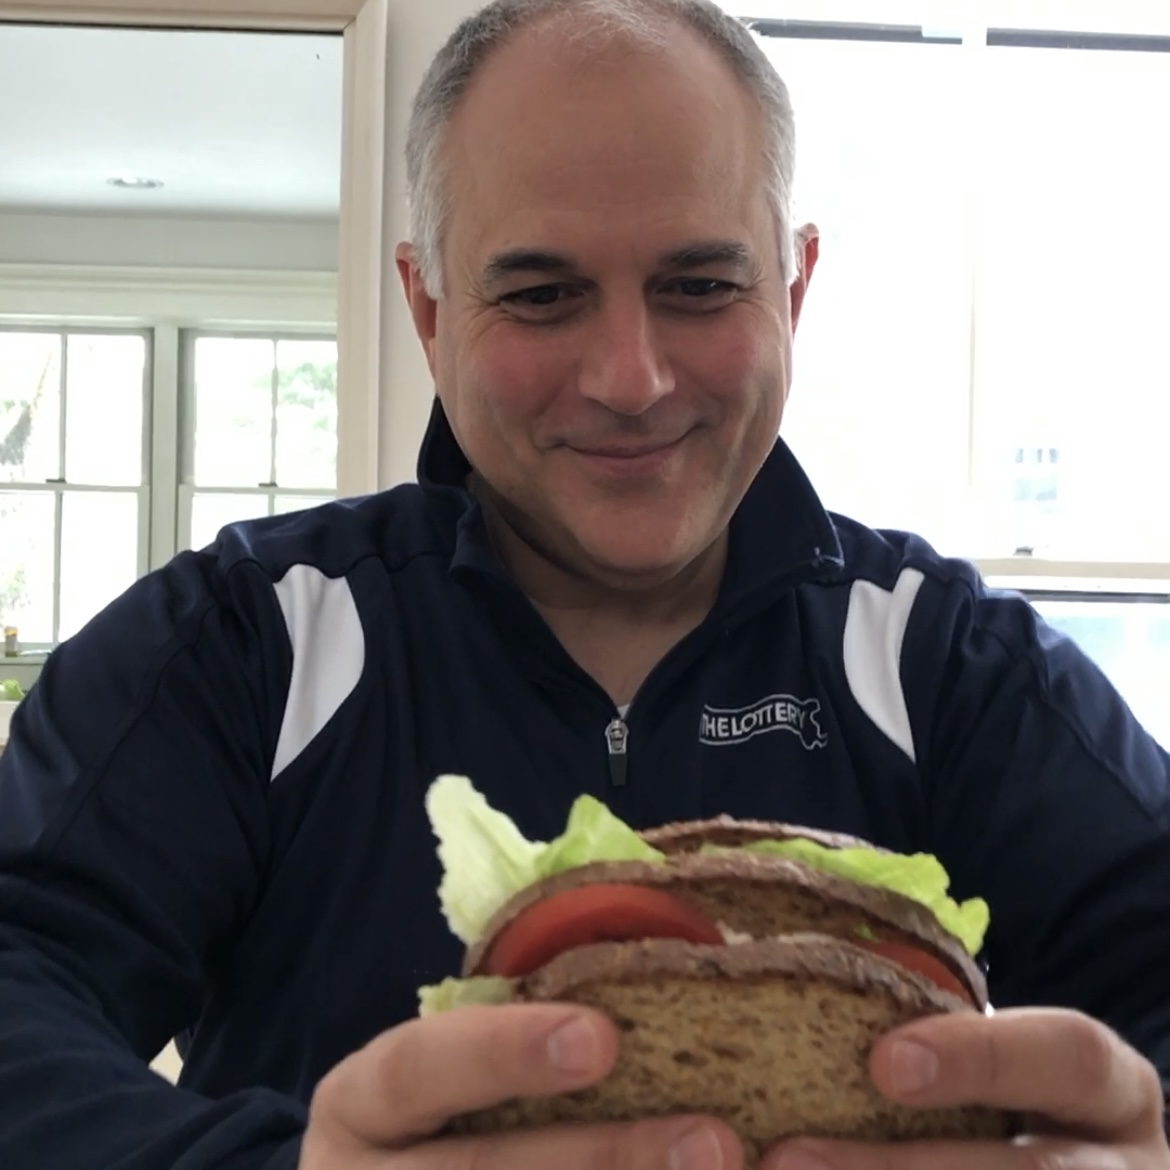 LBF's Husband Takes The 10 Minute Sandwich Challenge! 2/4 6:15 am - The ROR Morning Show Podcast